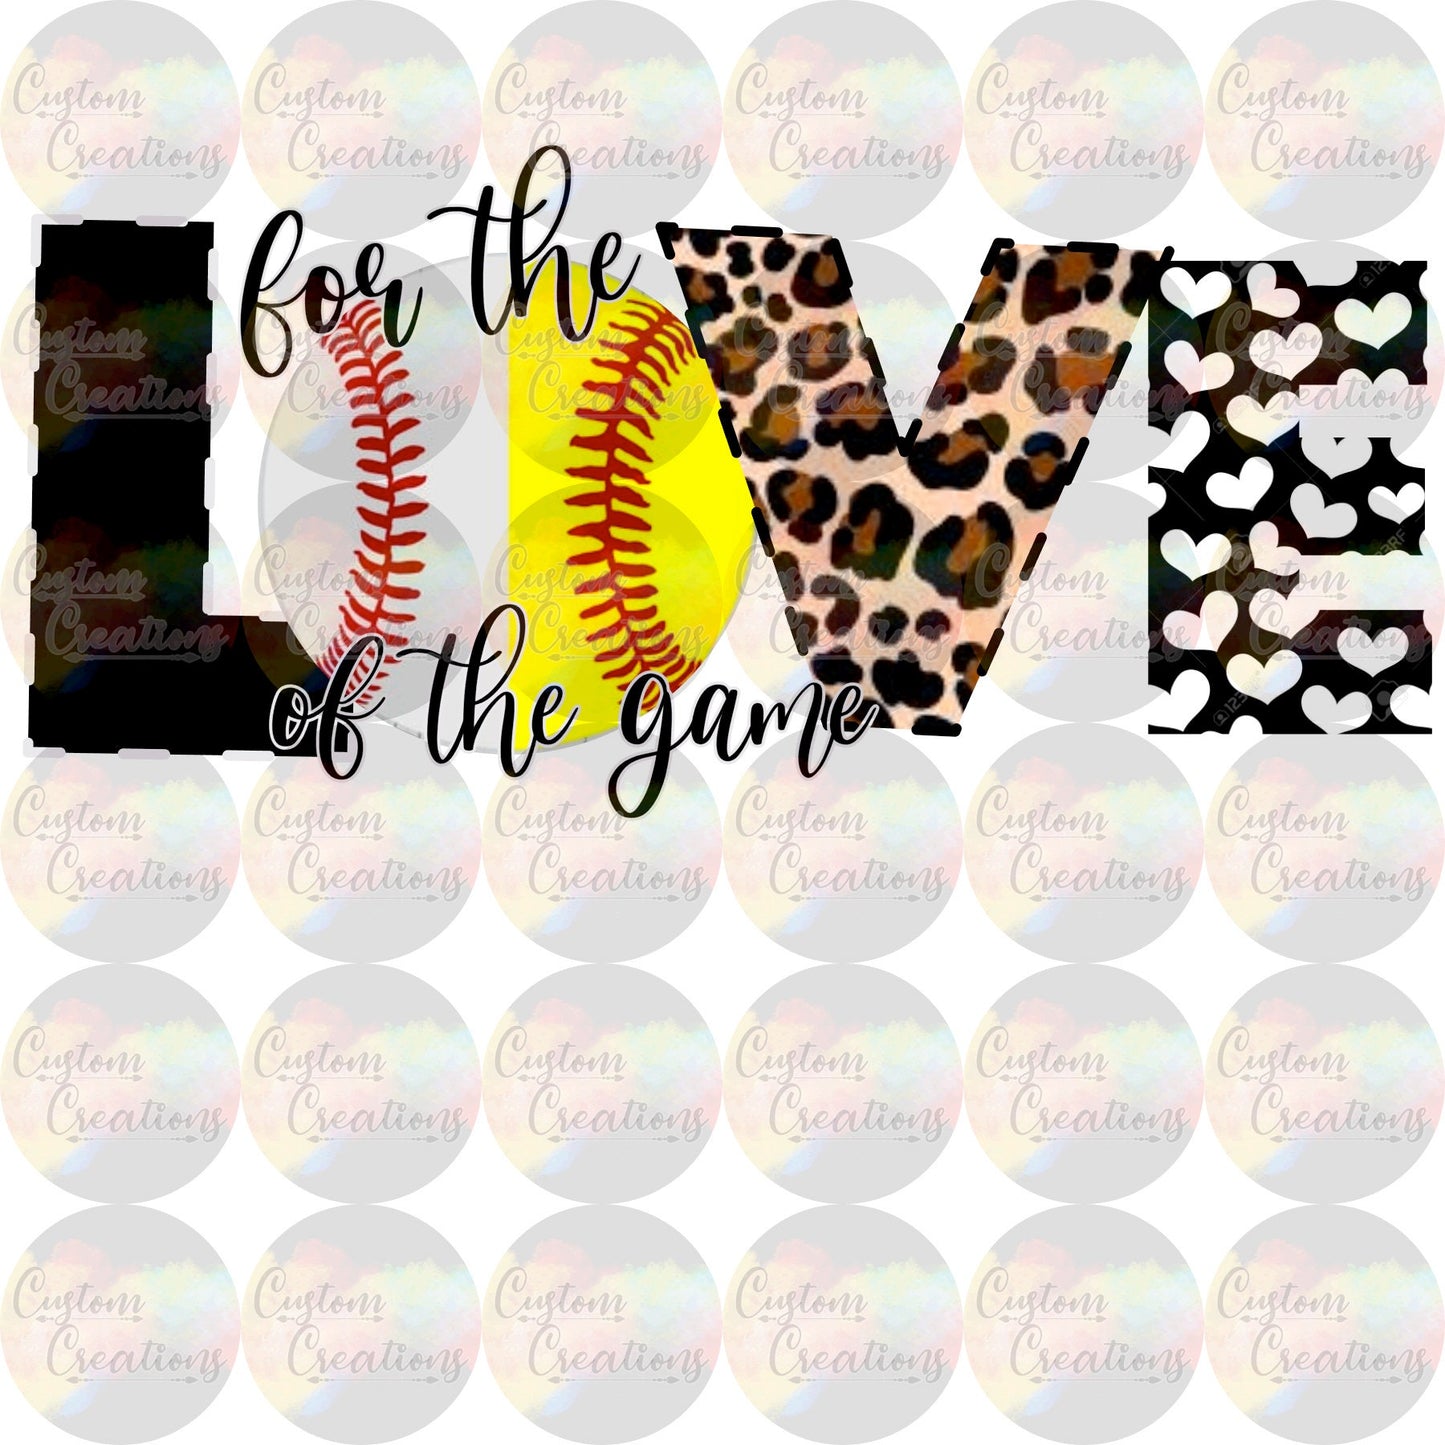 For The Love Of The Game Softball Baseball Mom 3.5" Clear Laser Printed Waterslide Print Clear Sealed